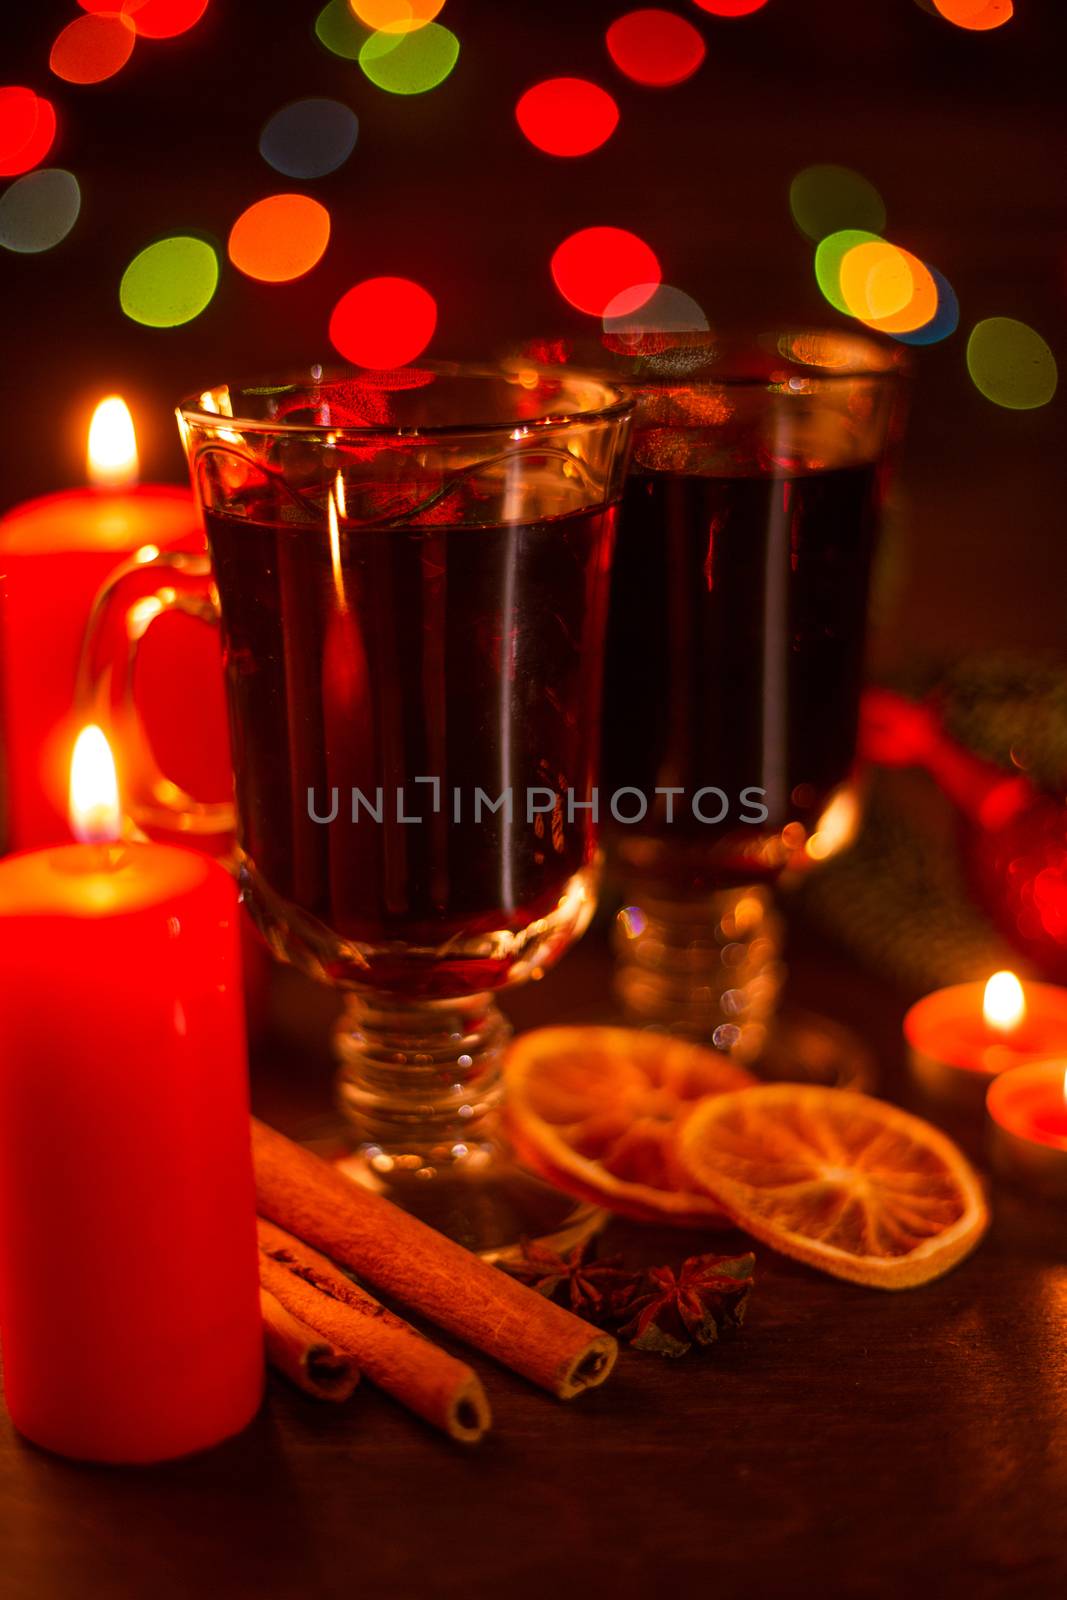 Mulled wine and holiday lights by destillat